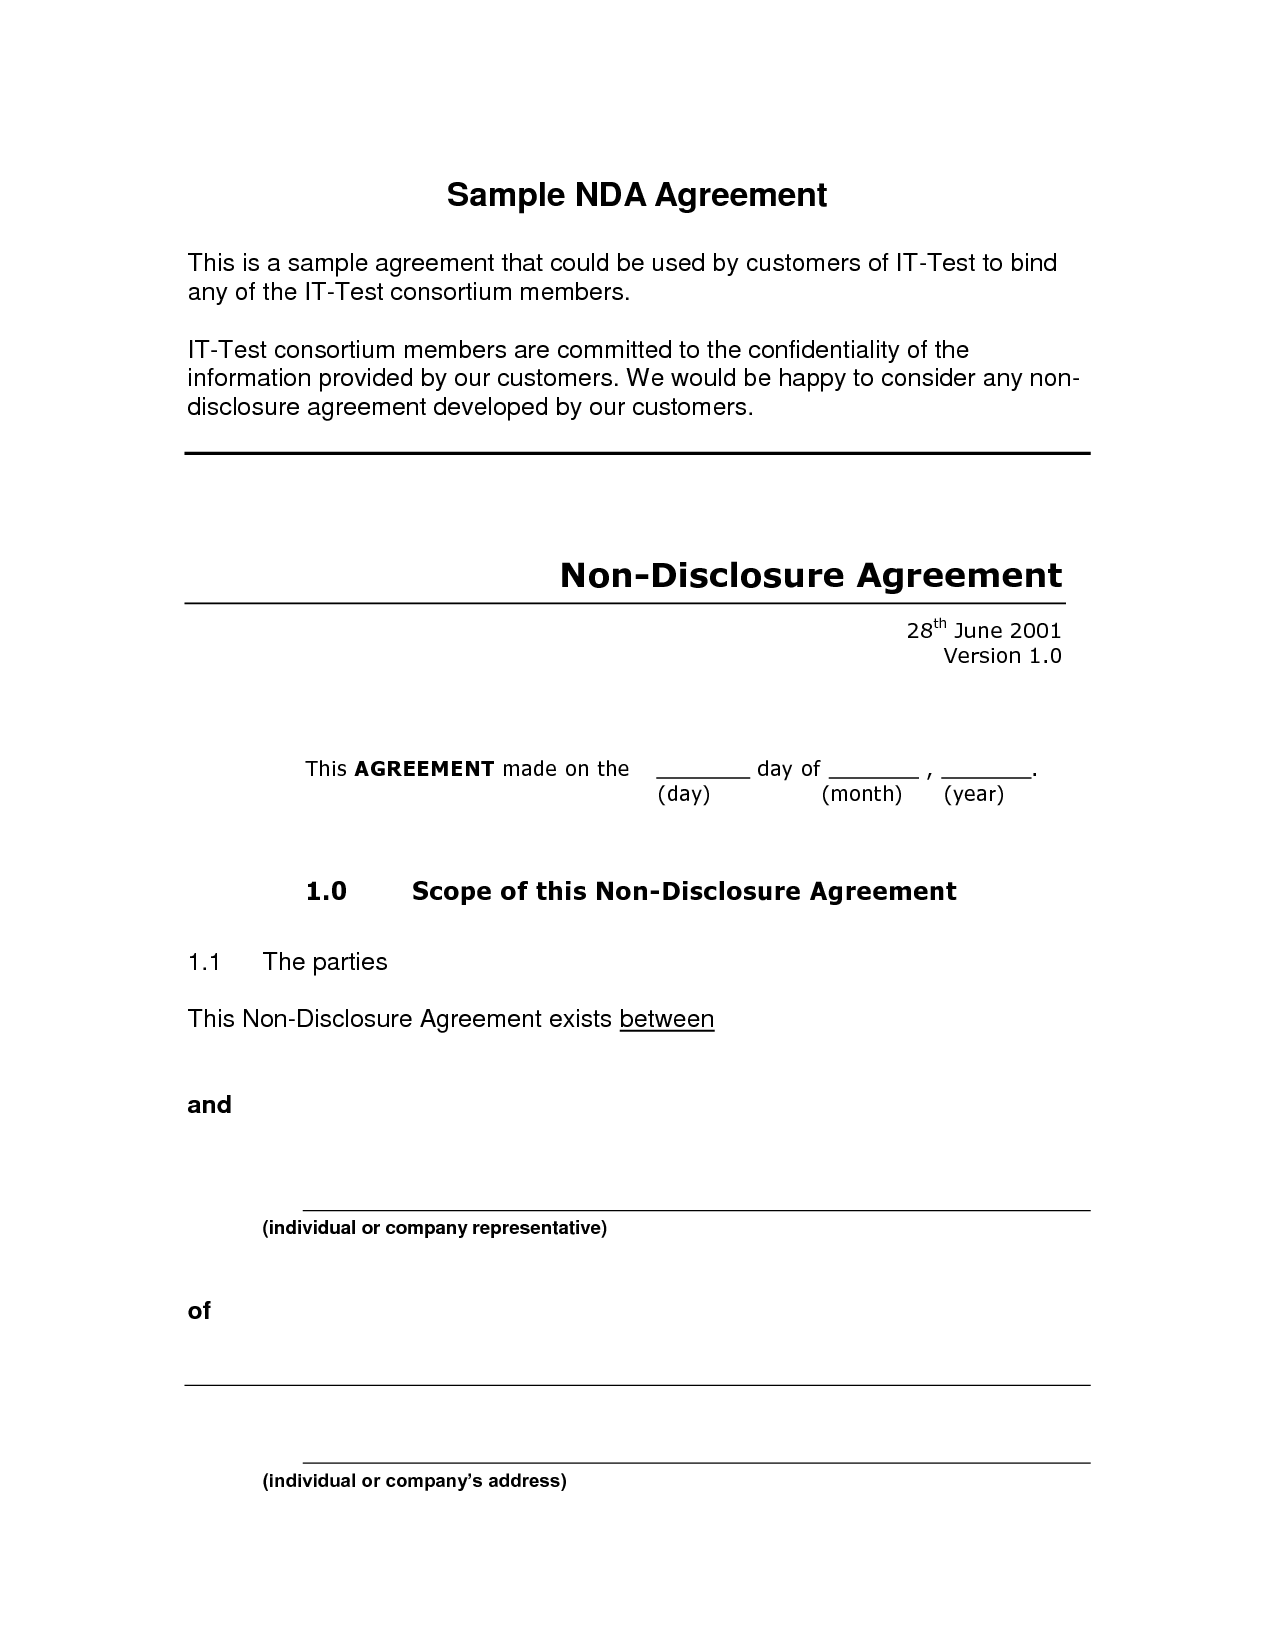 non-disclosure-agreement-sample-free-printable-documents